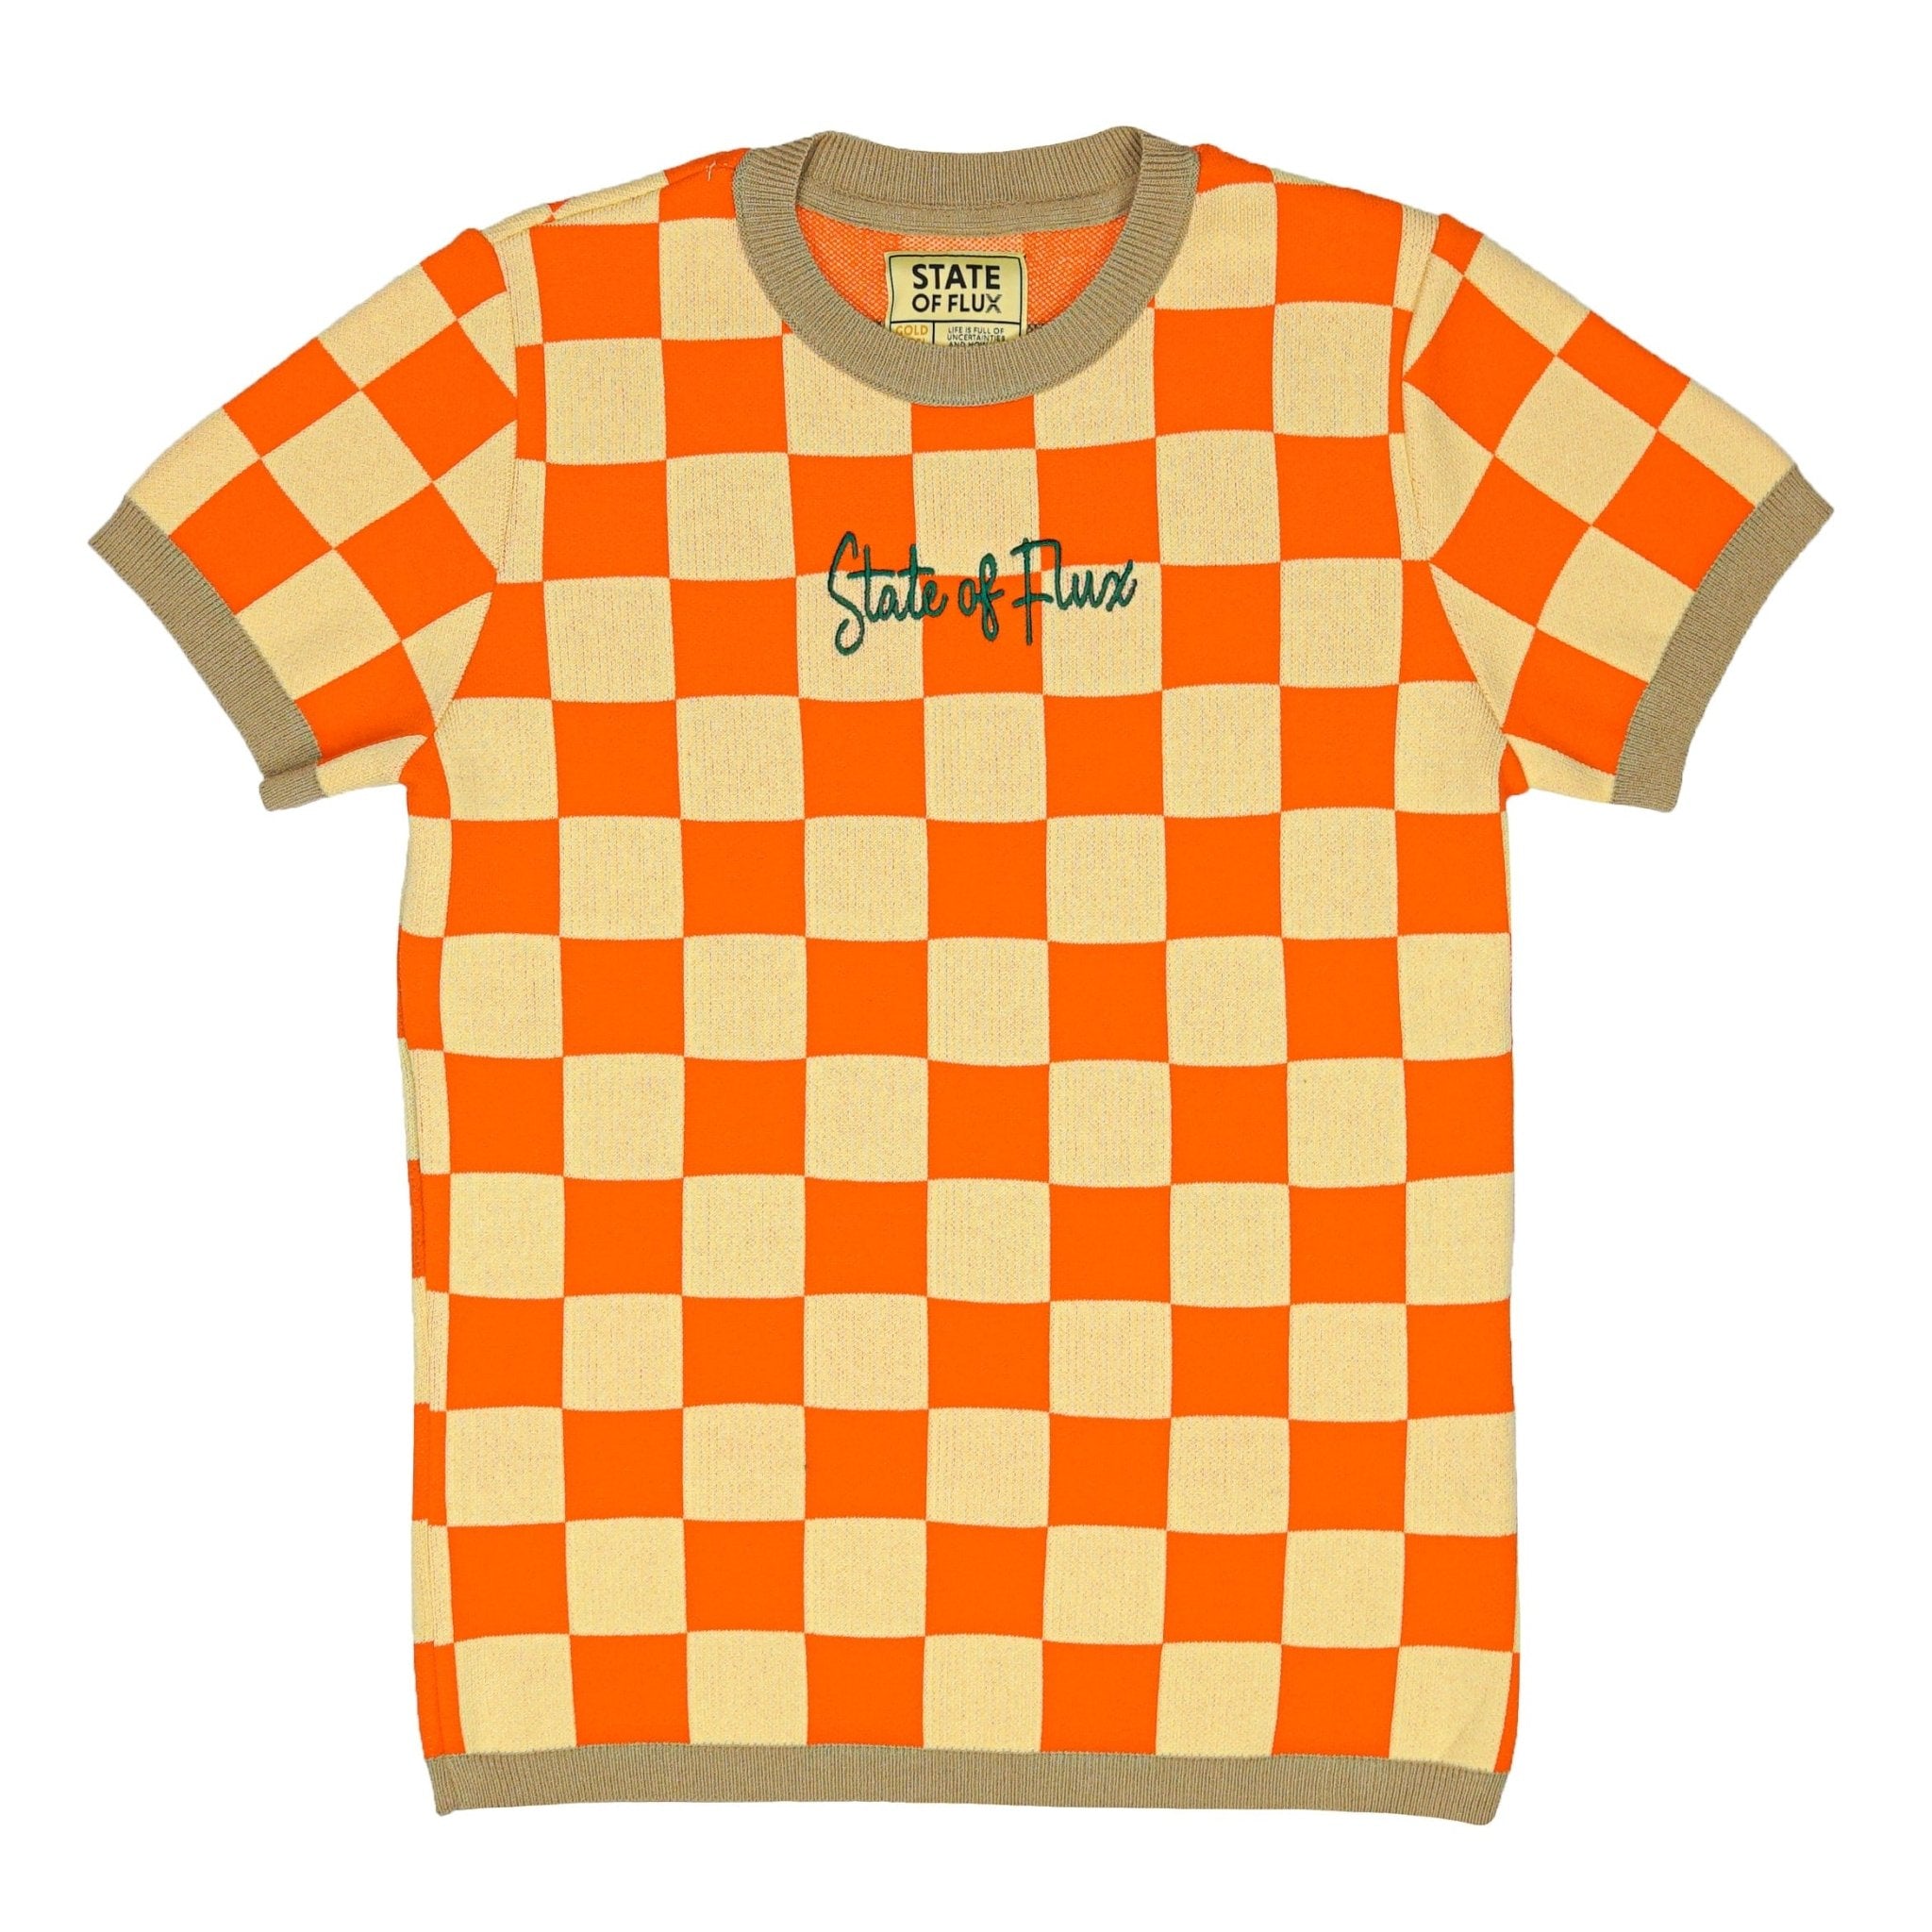 SOF Premium Checkerboard Knit Tee in orange and creamsicle